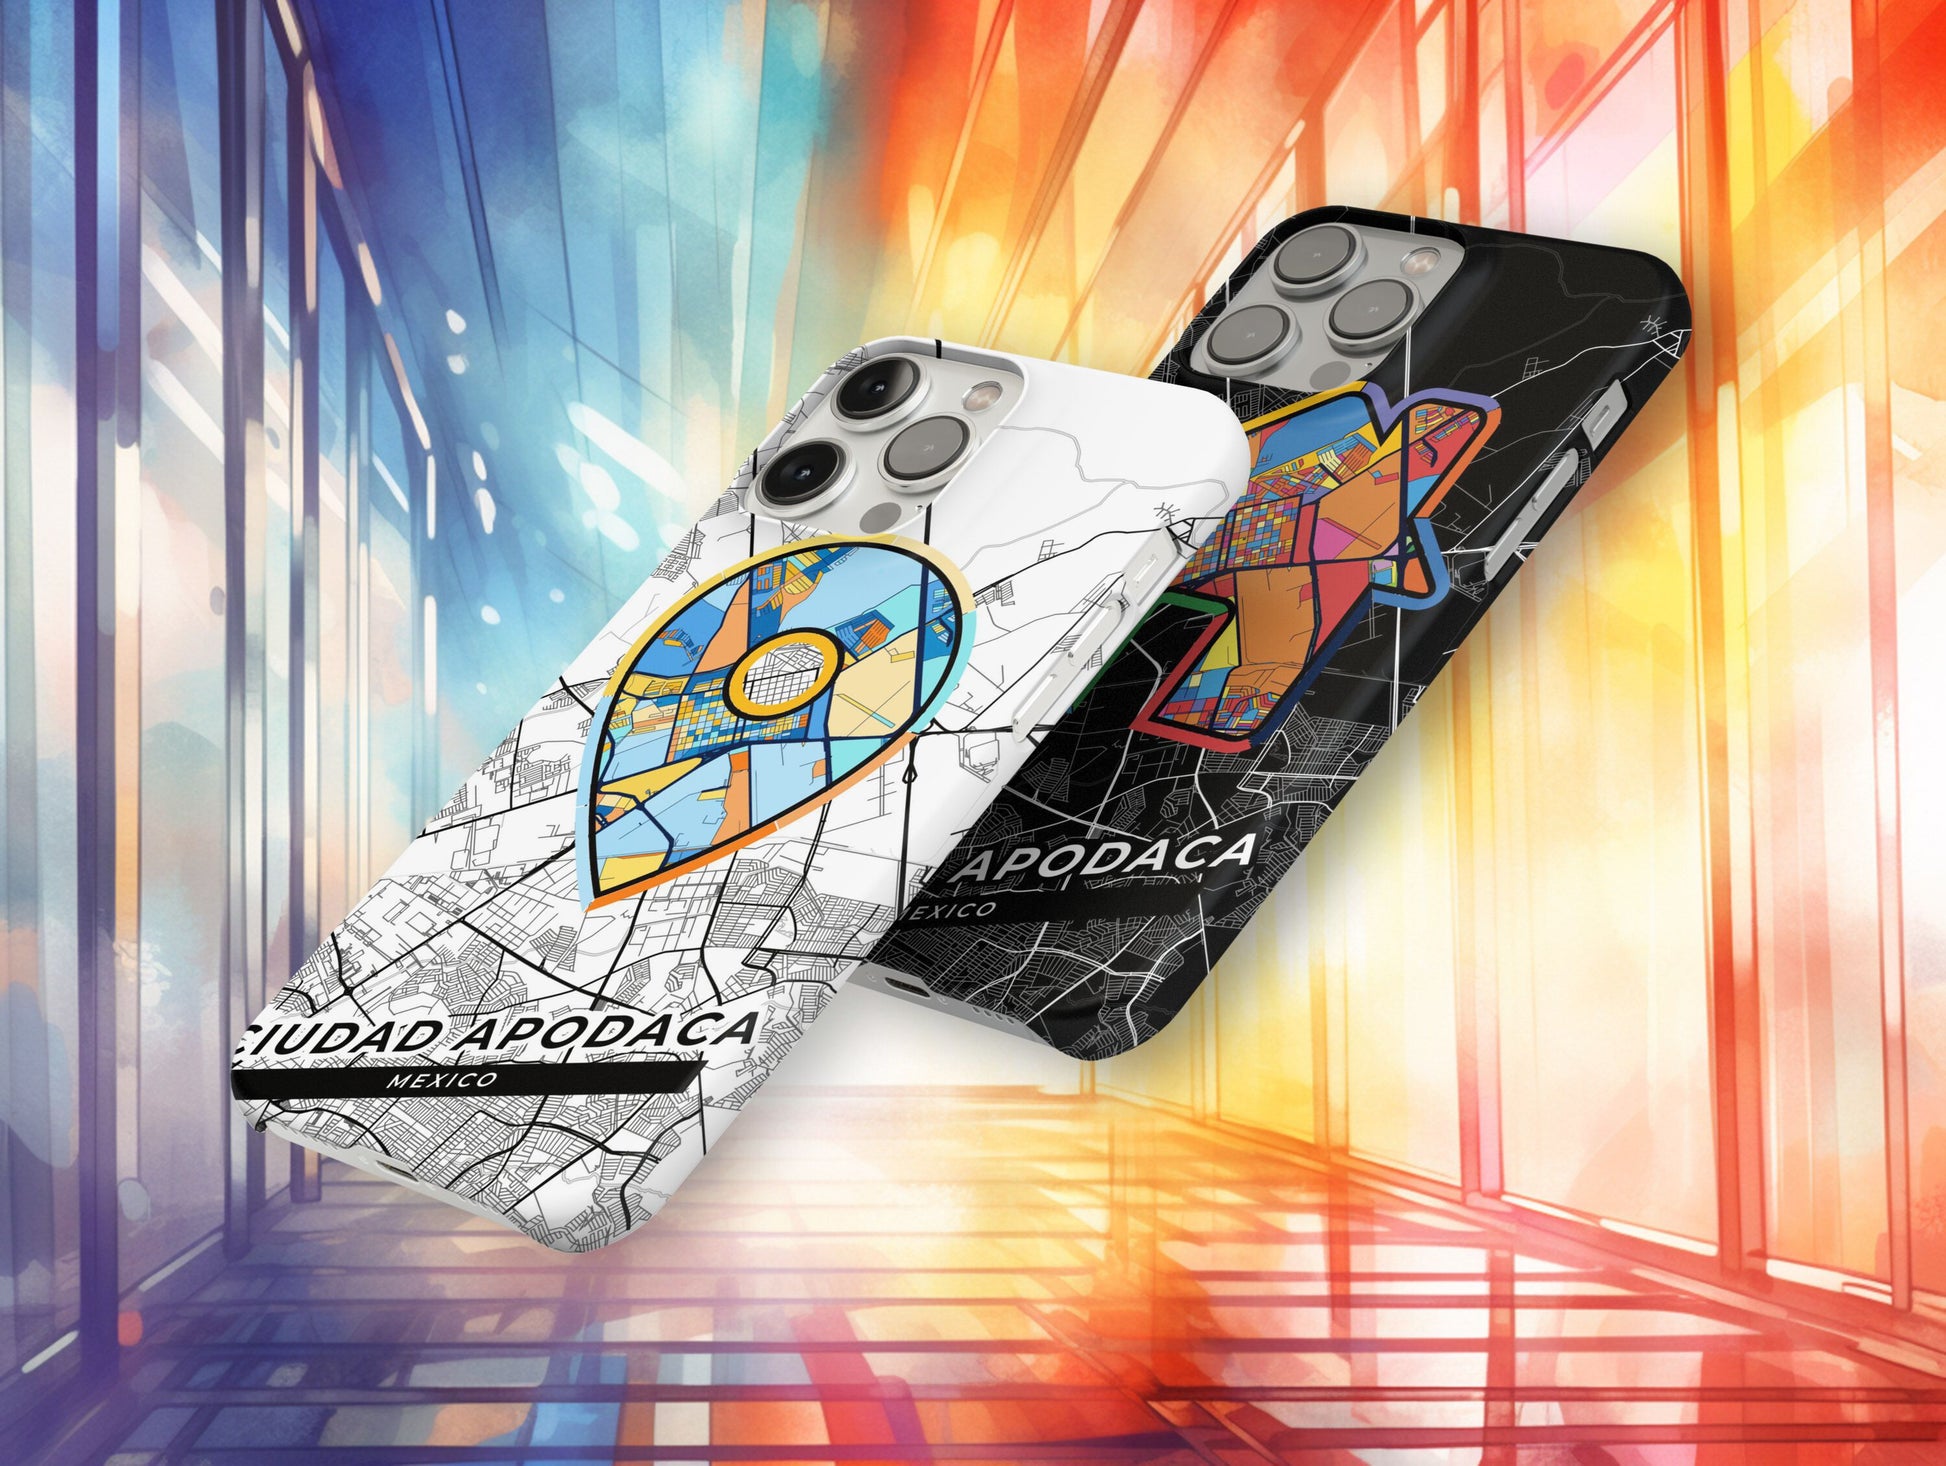 Ciudad Apodaca Mexico slim phone case with colorful icon. Birthday, wedding or housewarming gift. Couple match cases.